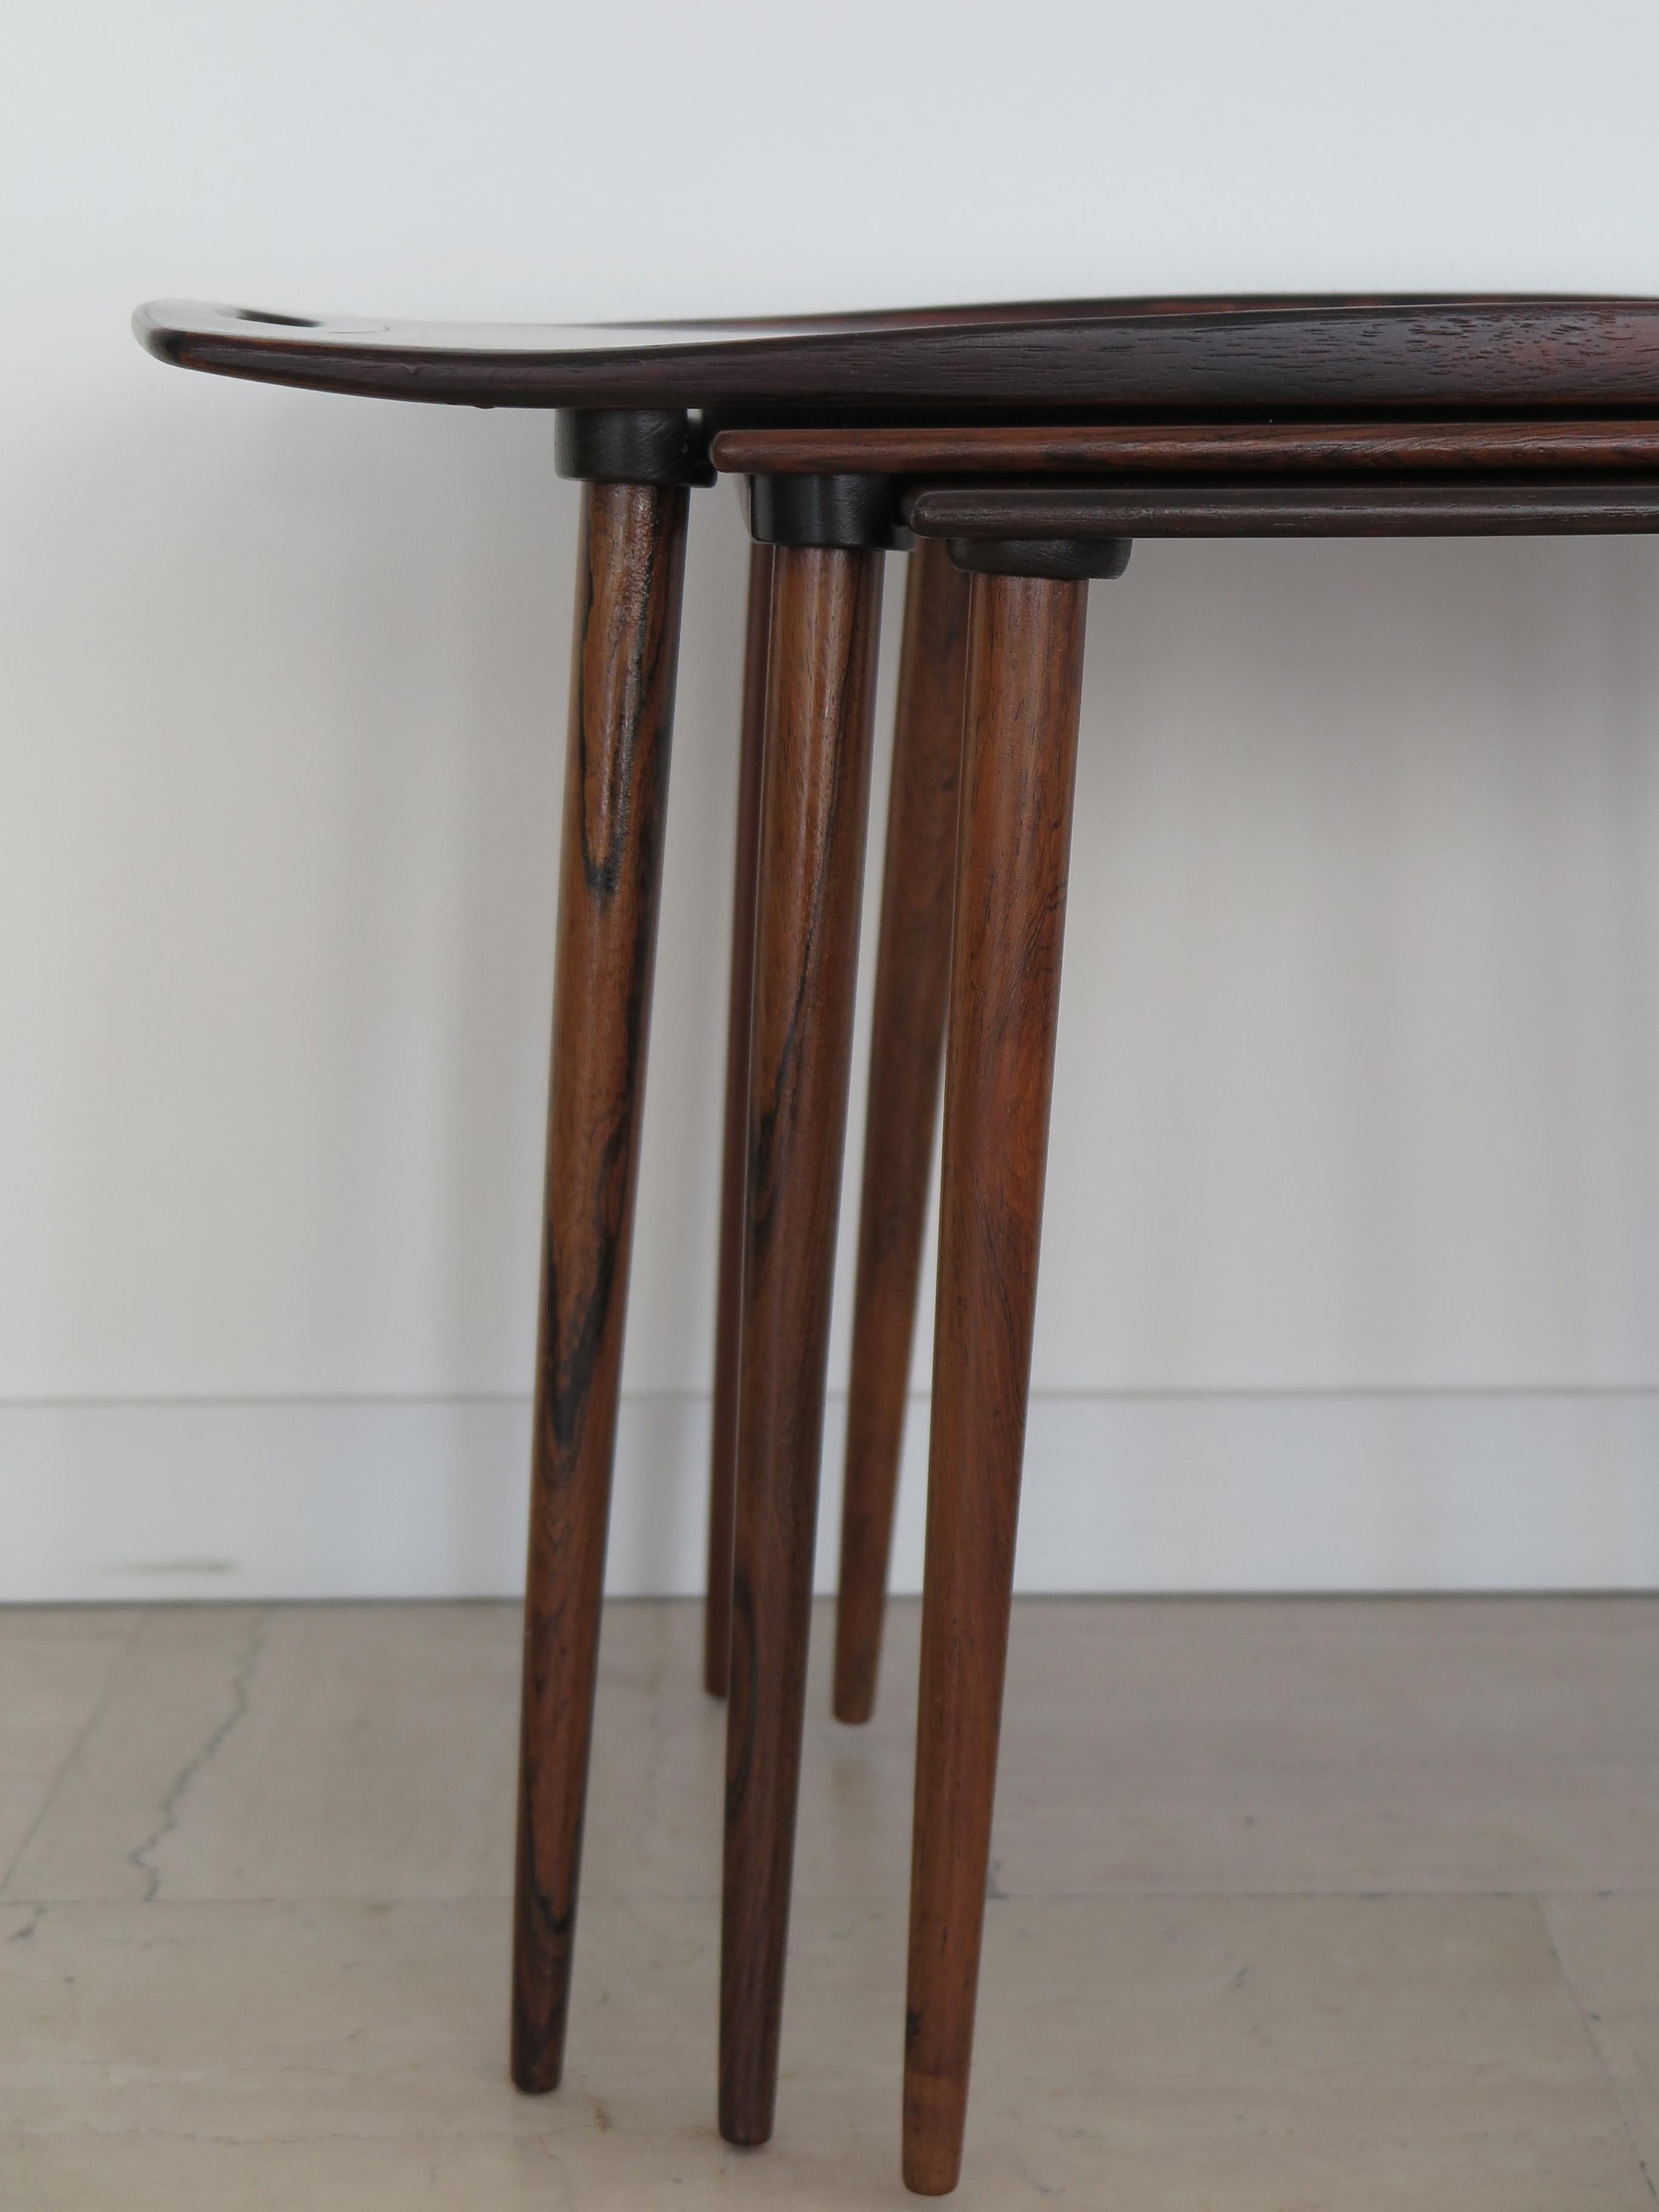 Mid-20th Century Jens Harald Quistgaard Tritico Scandinavian Dark Wood Side Tables, 1960s For Sale